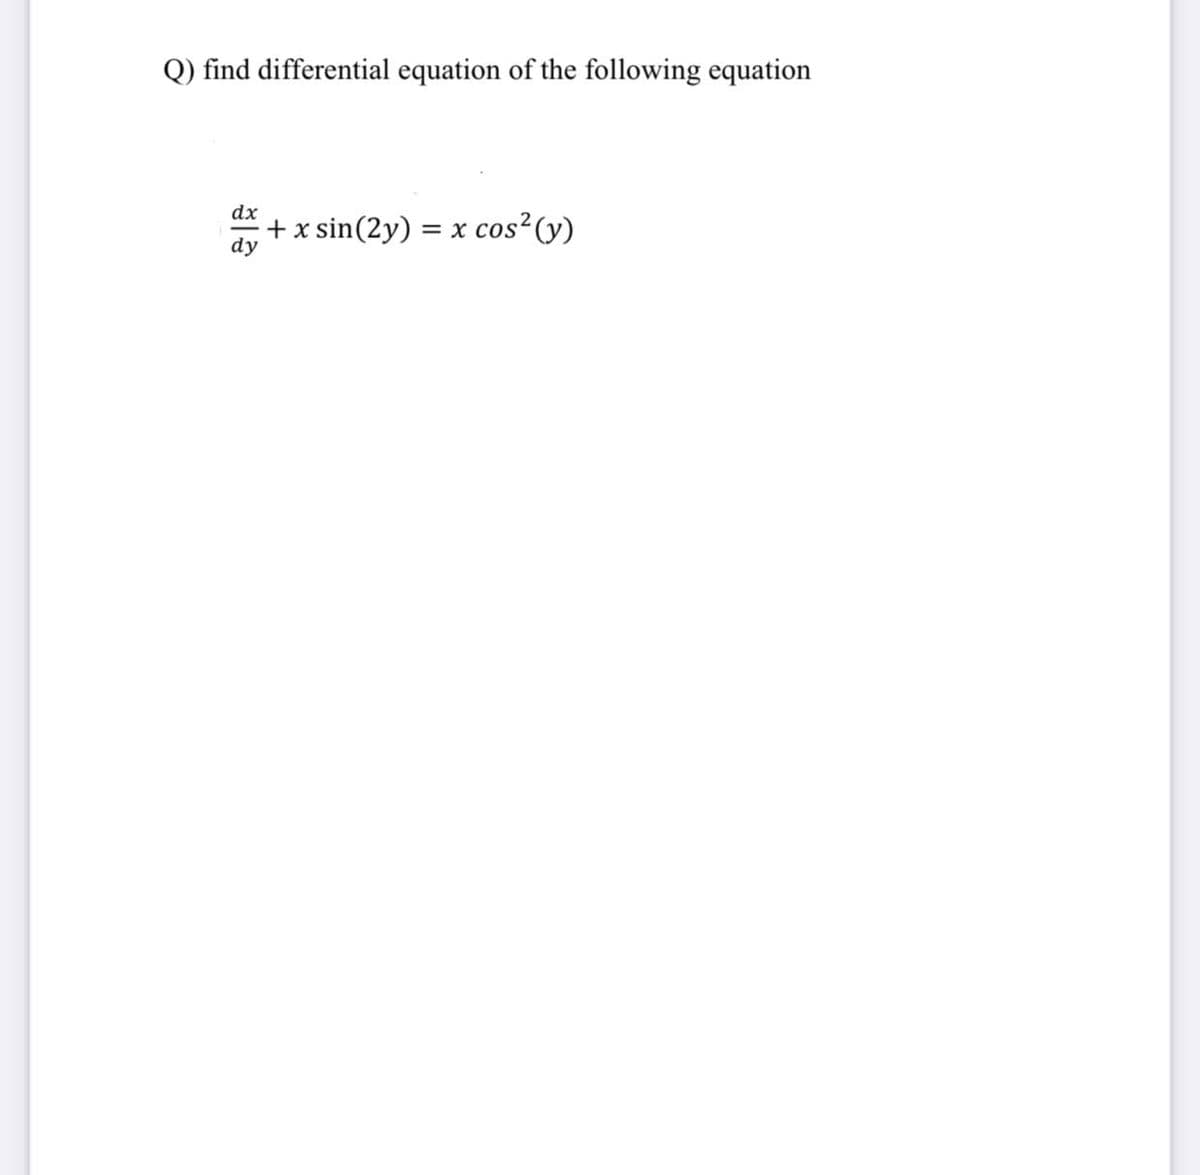 Q) find differential equation of the following equation
dx
+ x sin(2y) = x cos² (y)
dy